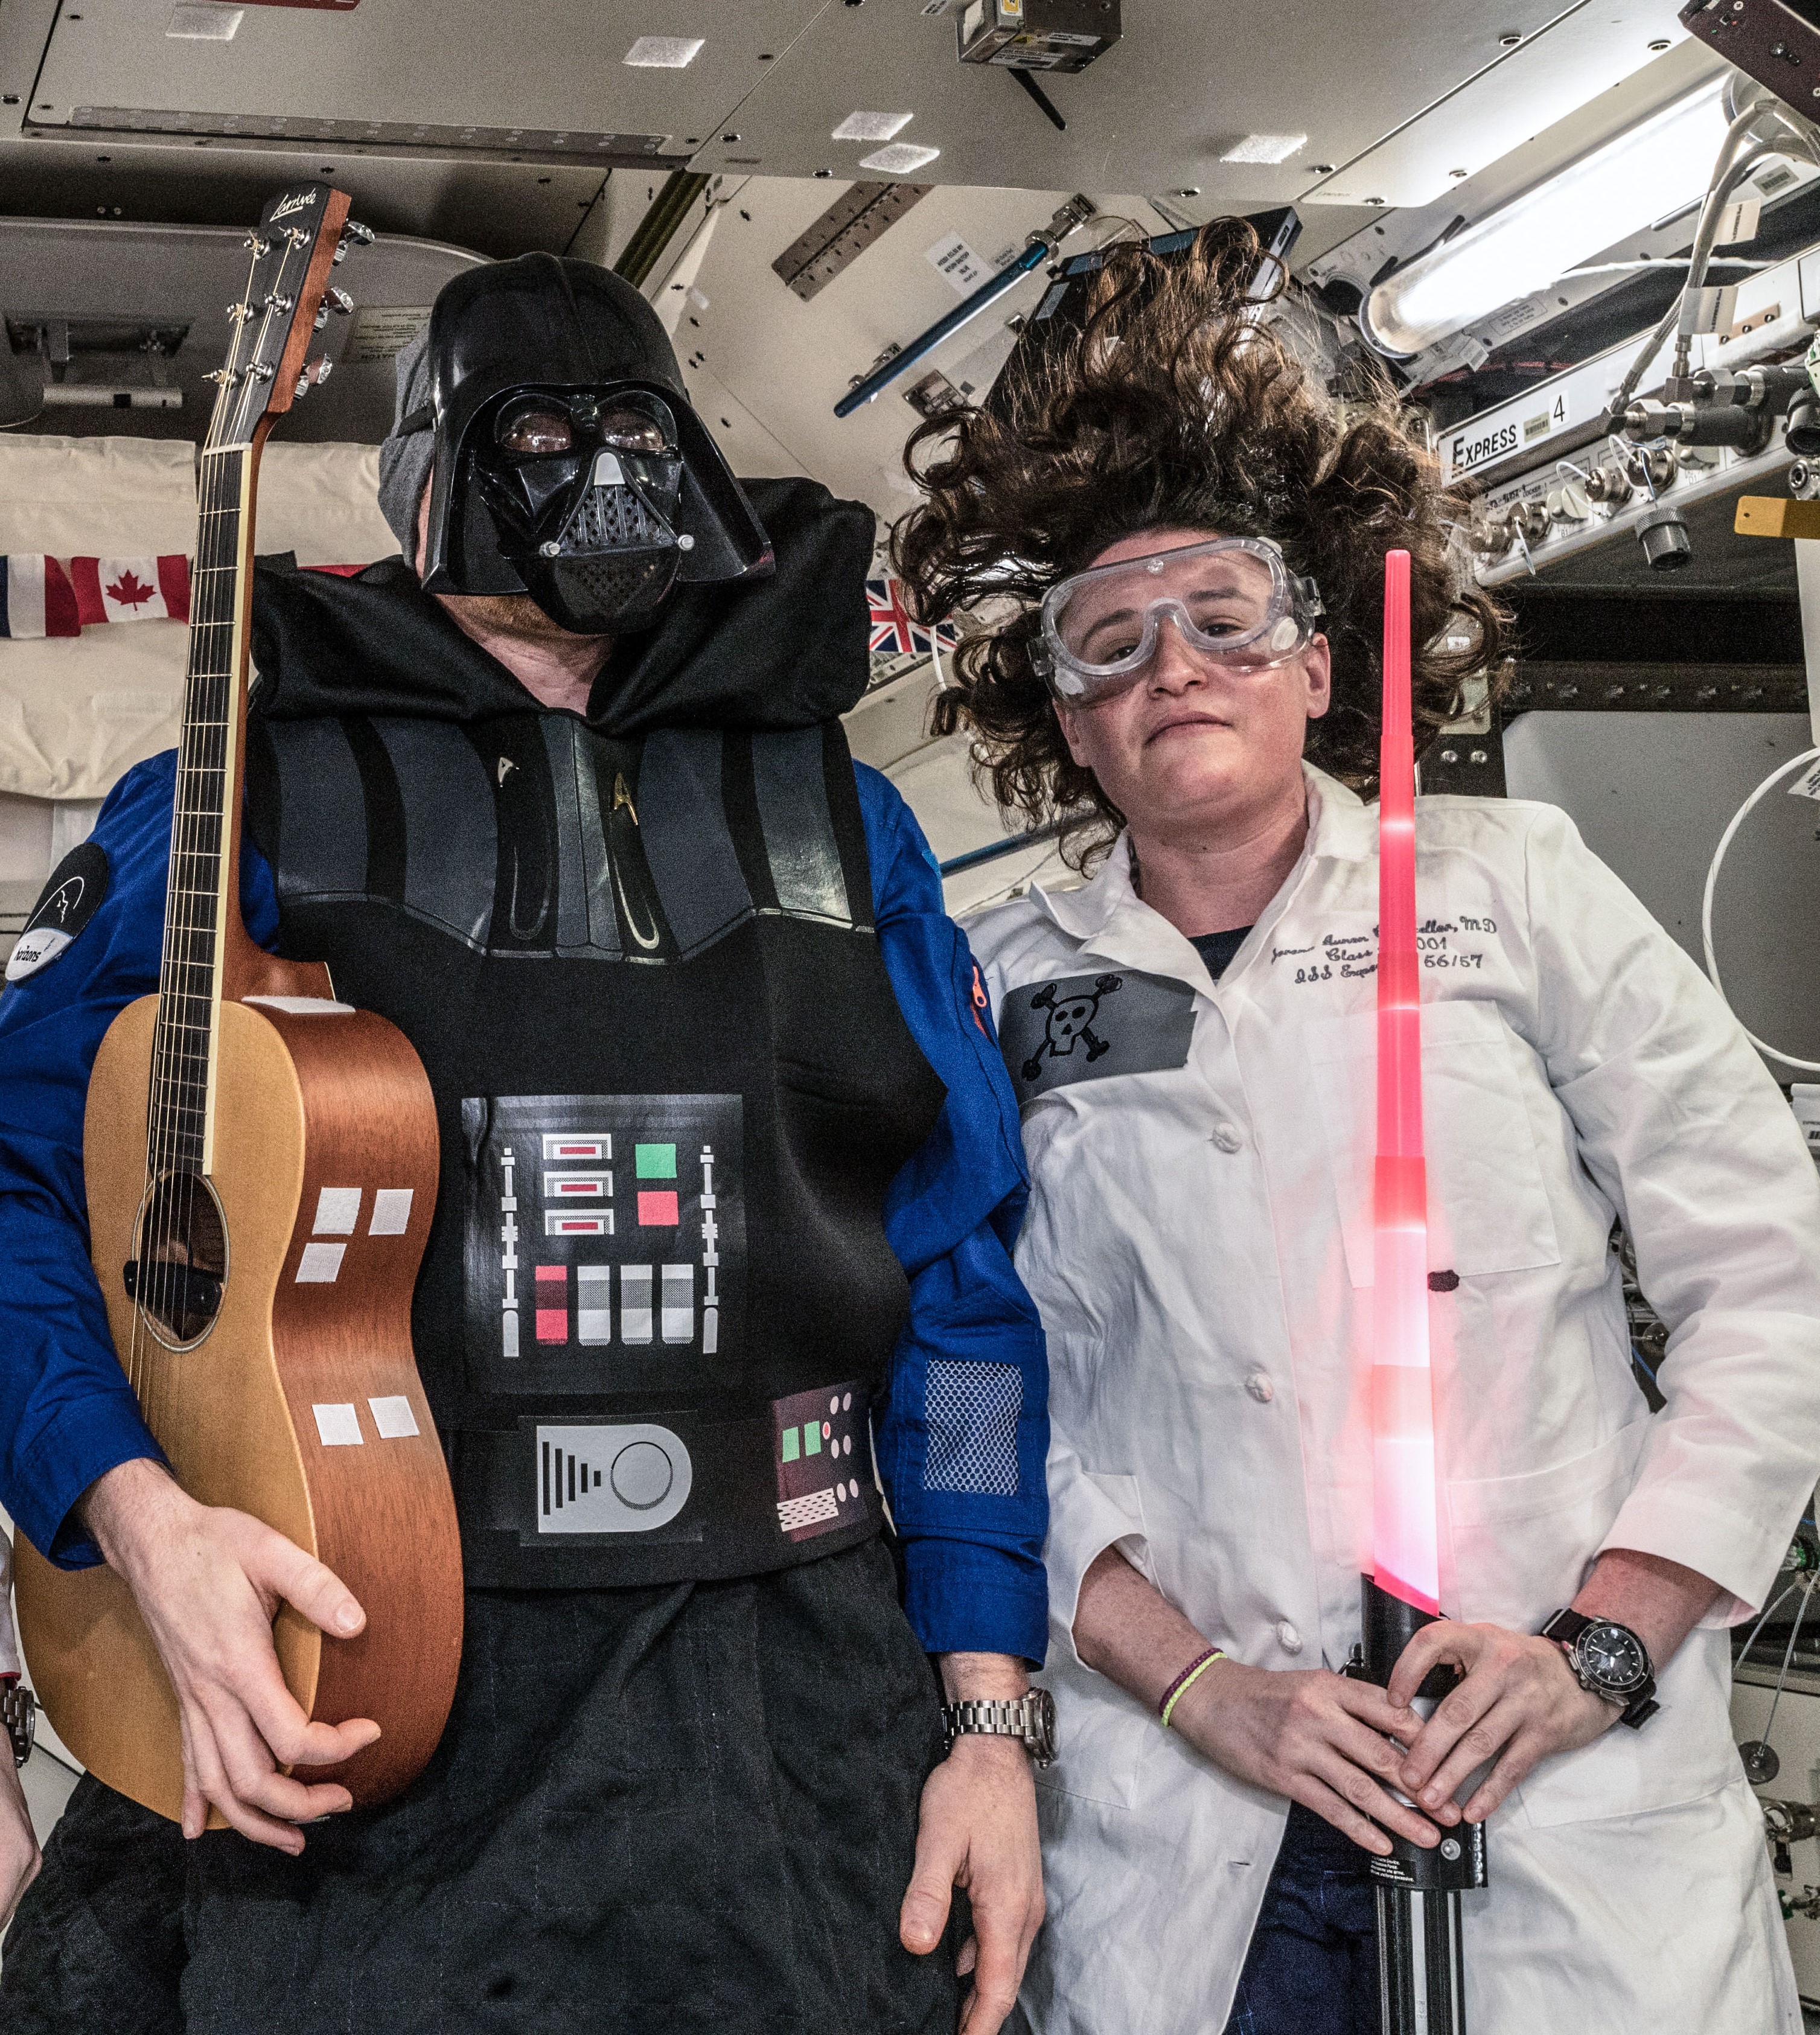 Expedition 57 crewmembers in their Halloween best – European Space Agency astronaut and Commander Alexander Gerst, left, and NASA astronaut Serena M. Auñón-Chancellor